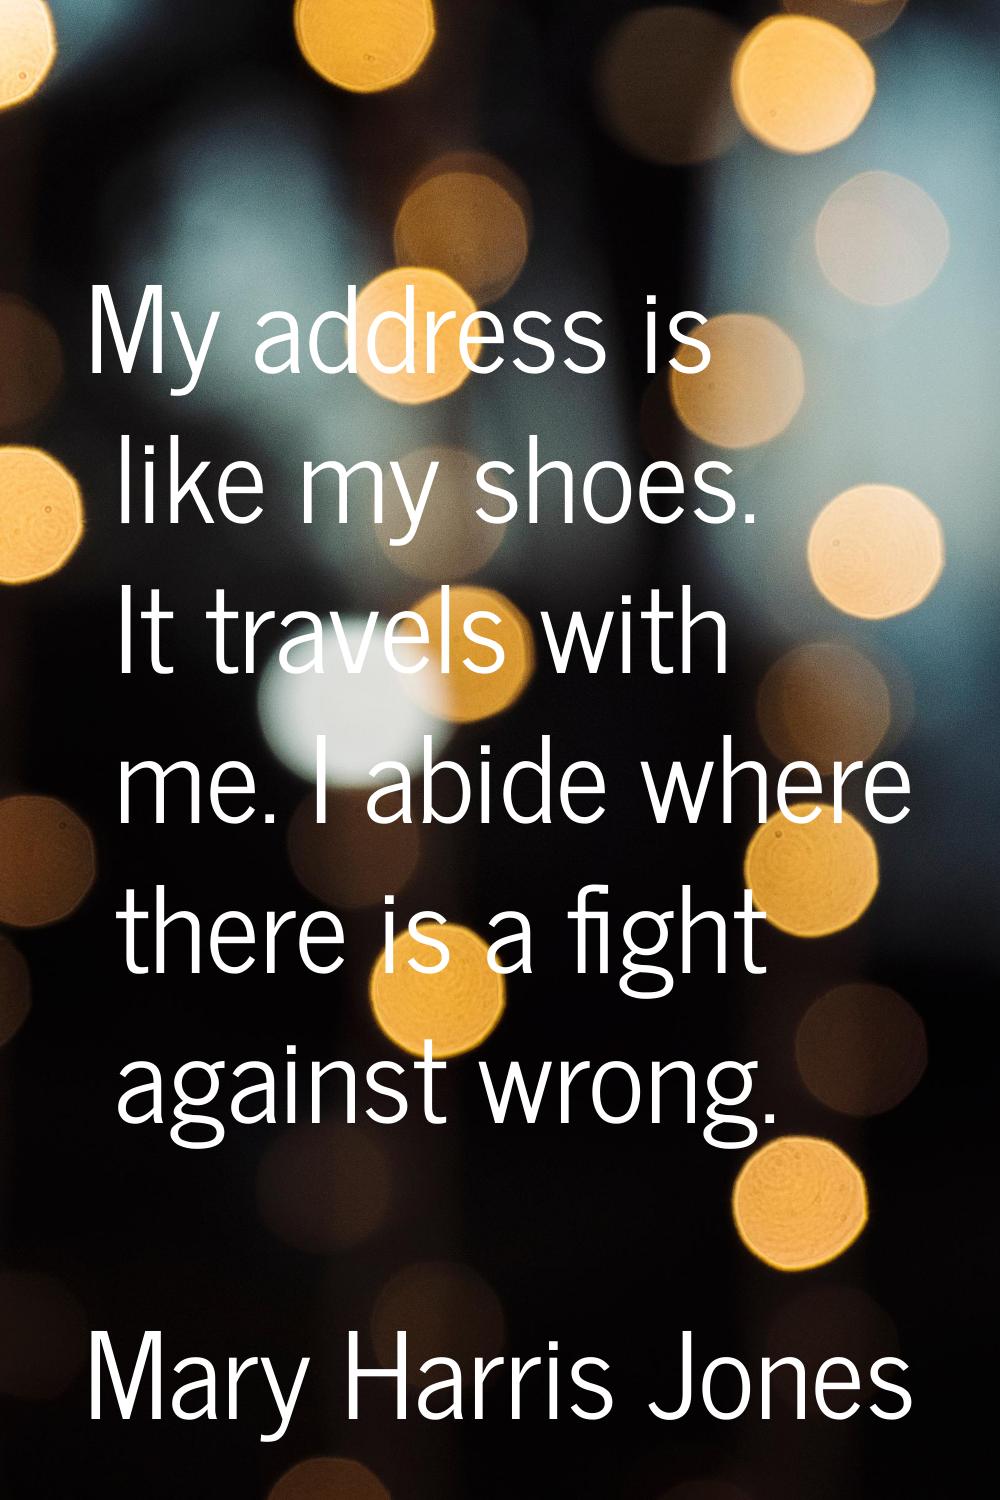 My address is like my shoes. It travels with me. I abide where there is a fight against wrong.